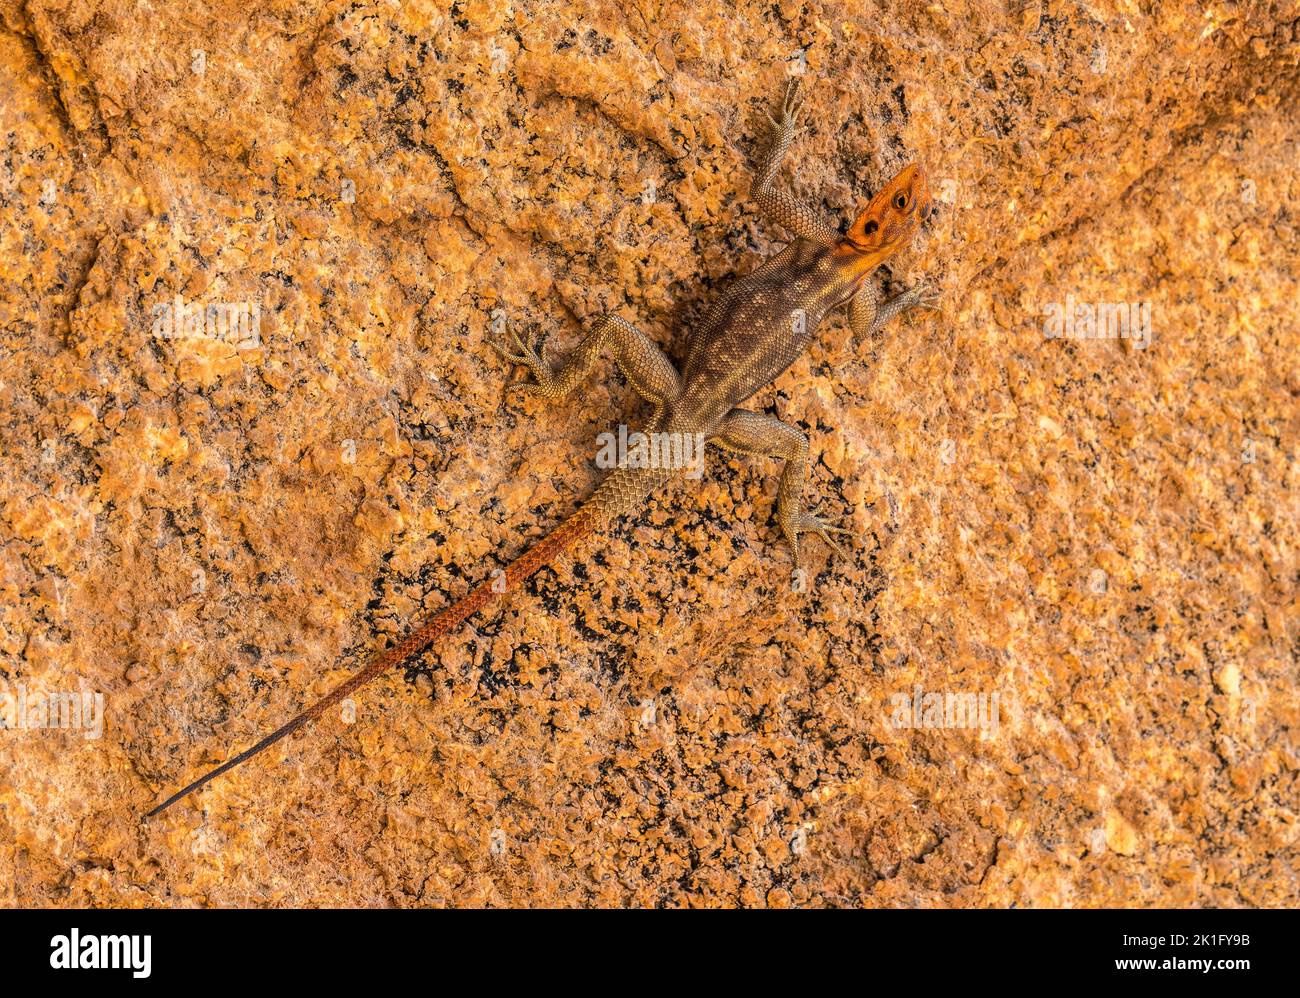 Master of camouflage: Male Namib Rock Agama (Agama planiceps) on granite rocky outcrop of Spitzkoppe, Namibia Stock Photo